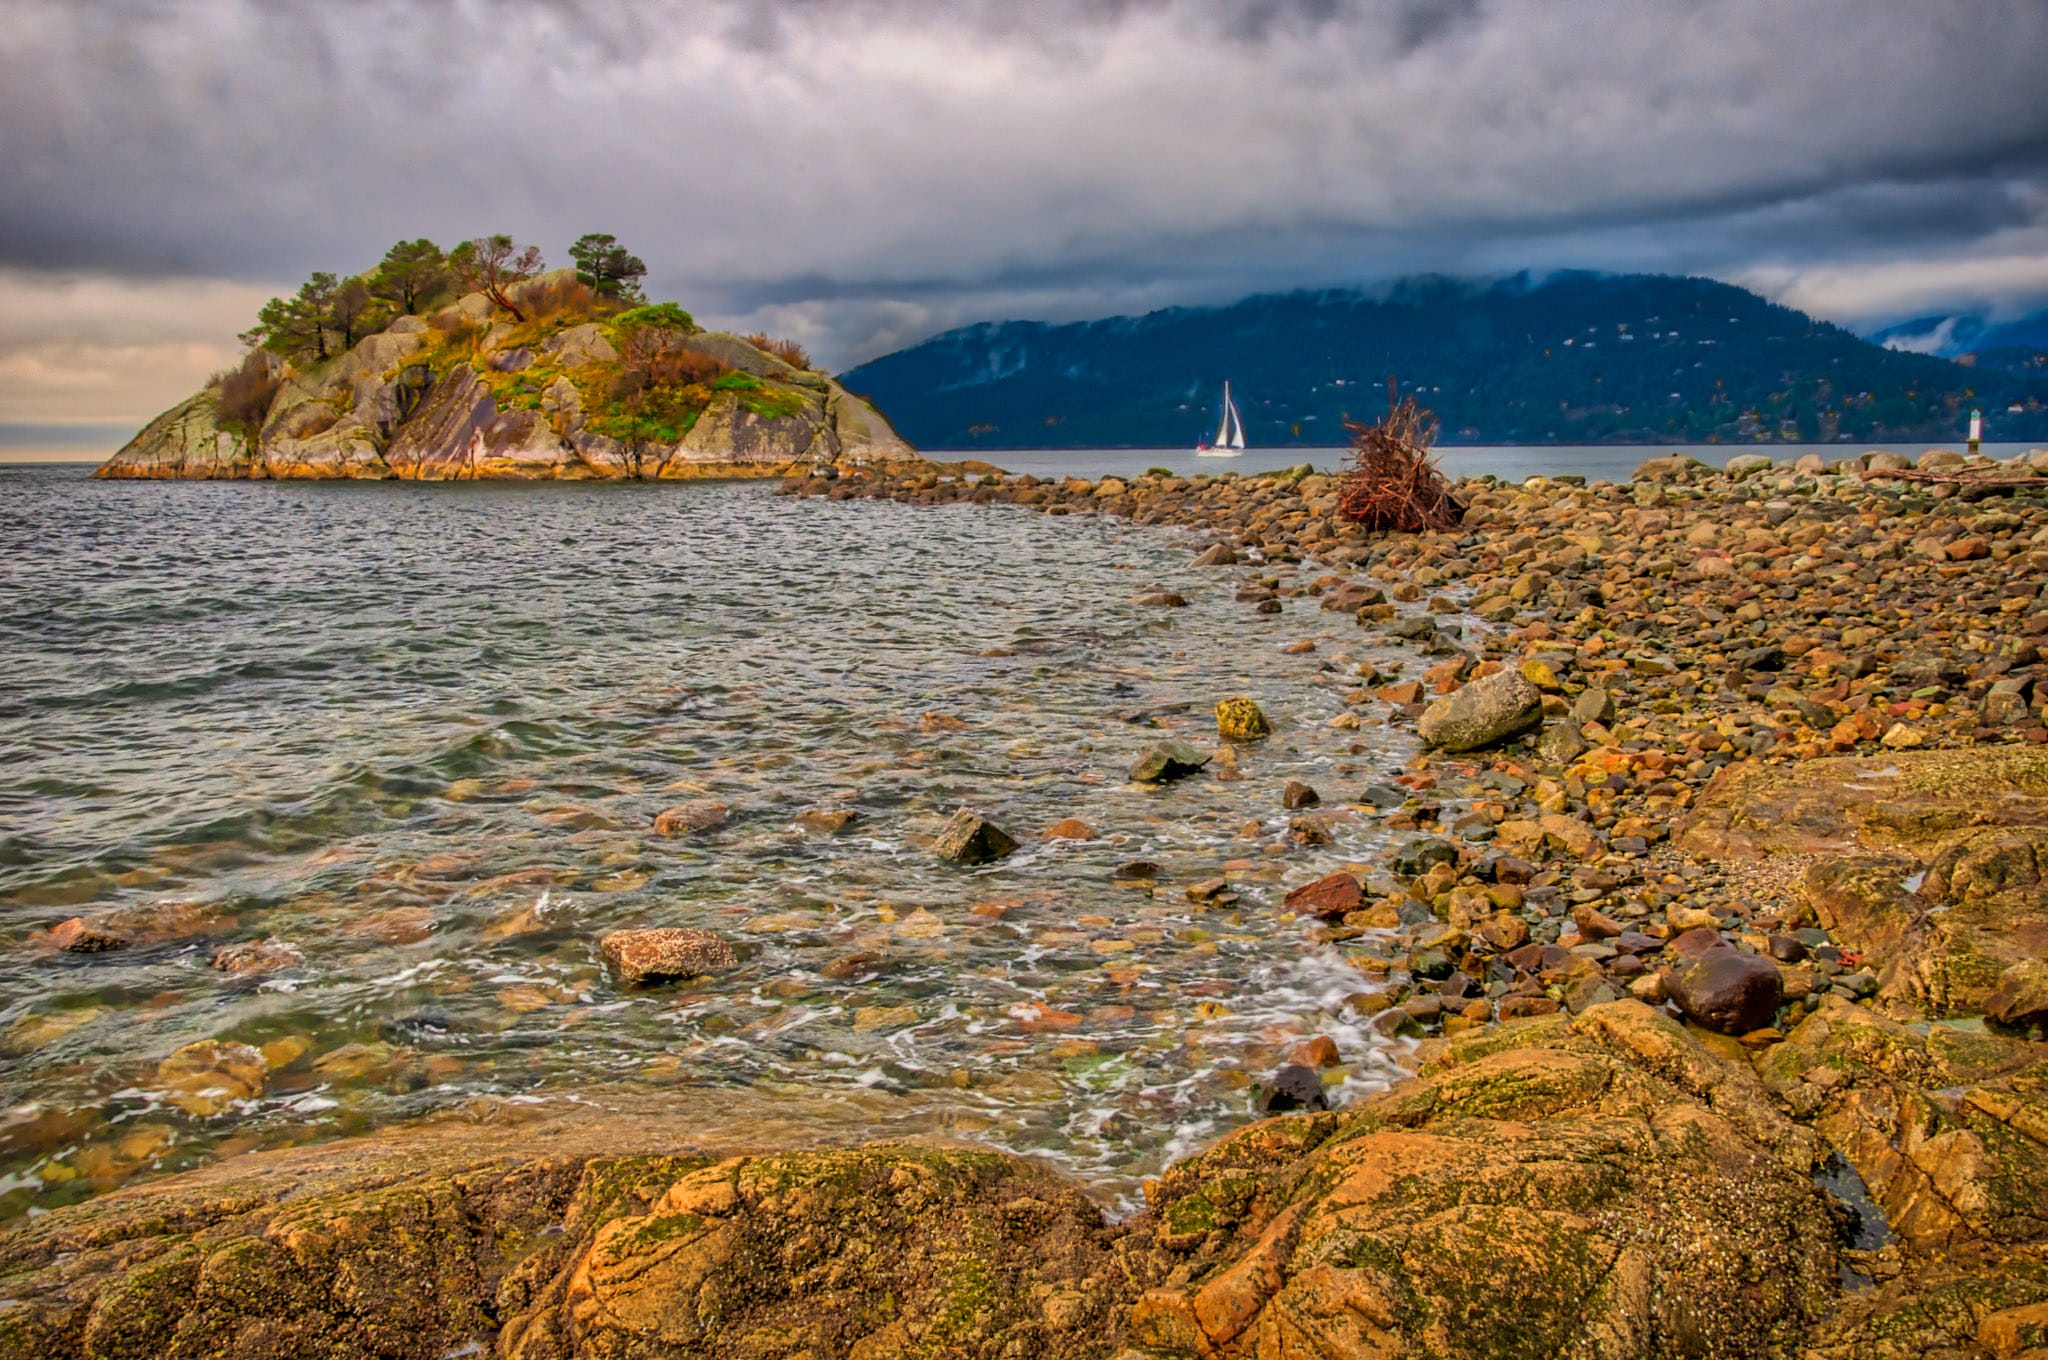 A view at sunset along the shore of Whytecliff Park with Bowyer Island, in West Vancouver, British Columbia.